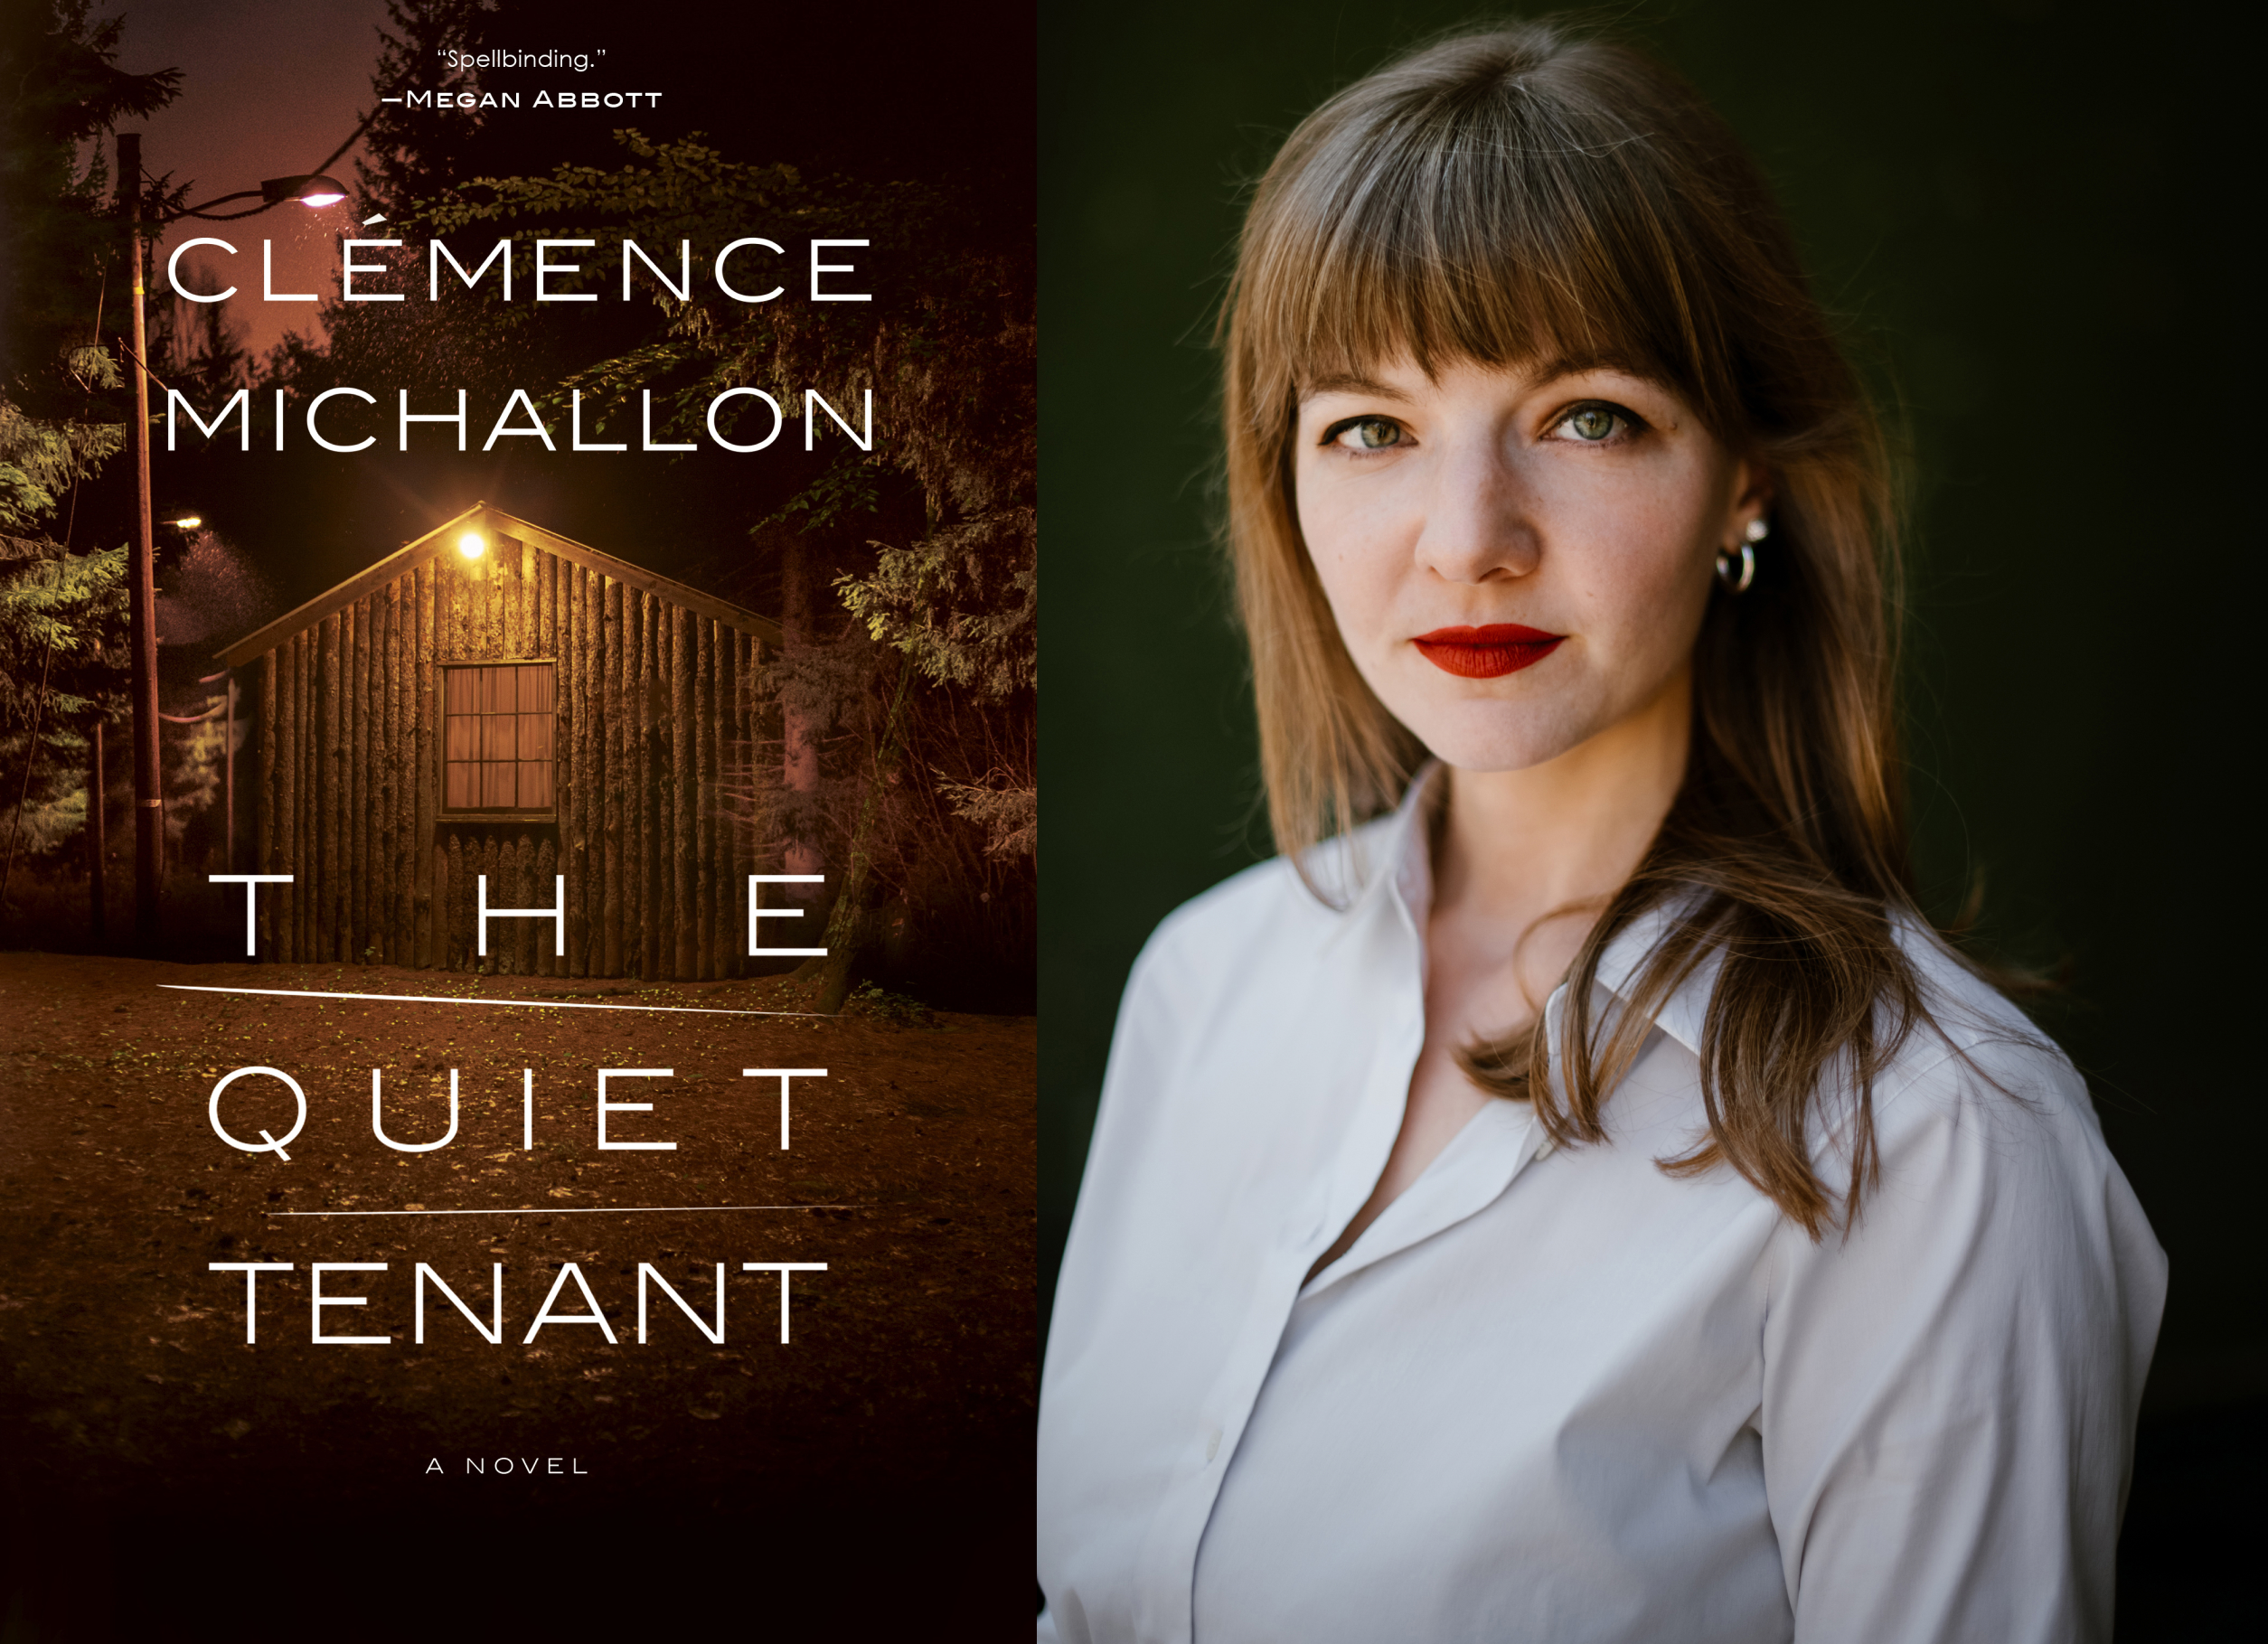 Article image for: 'The Quiet Tenant,' by Clémence Michallon: An Excerpt